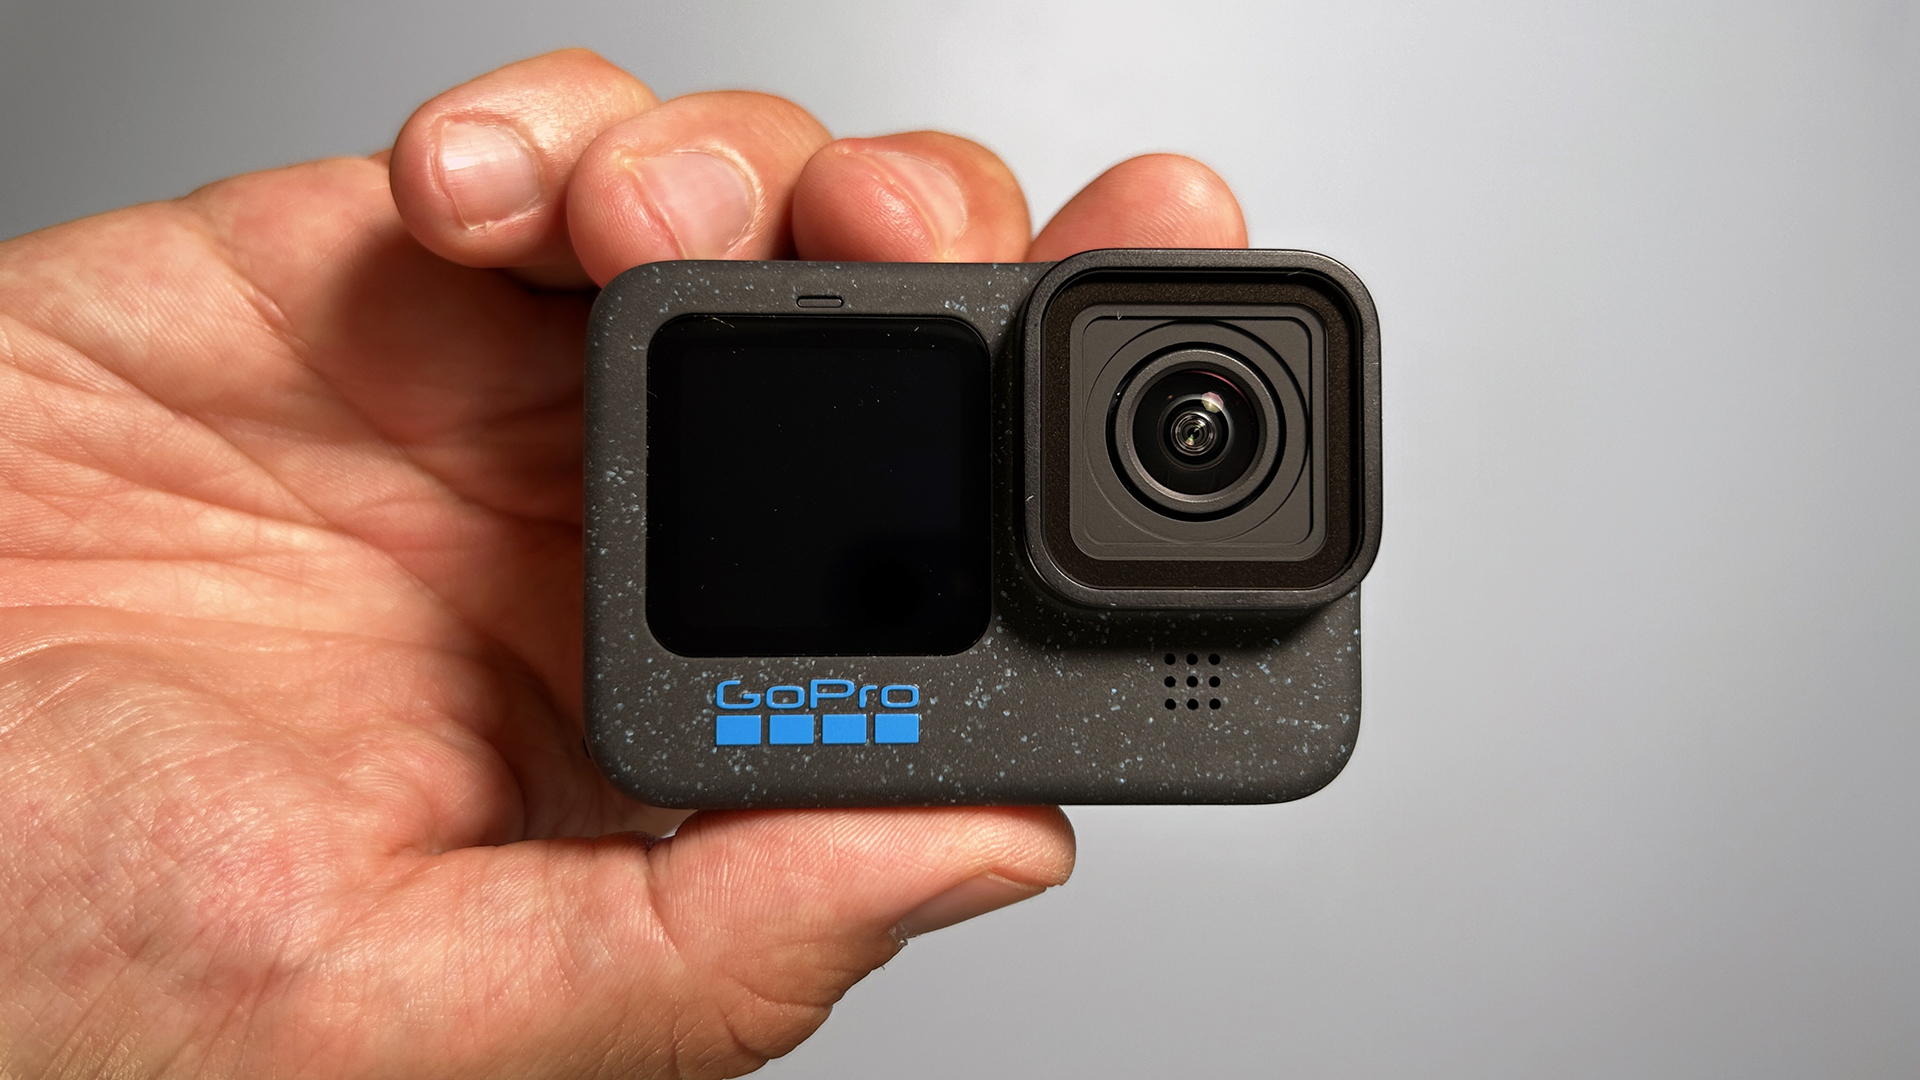 GoPro takes it up to 11 with three new actioncams